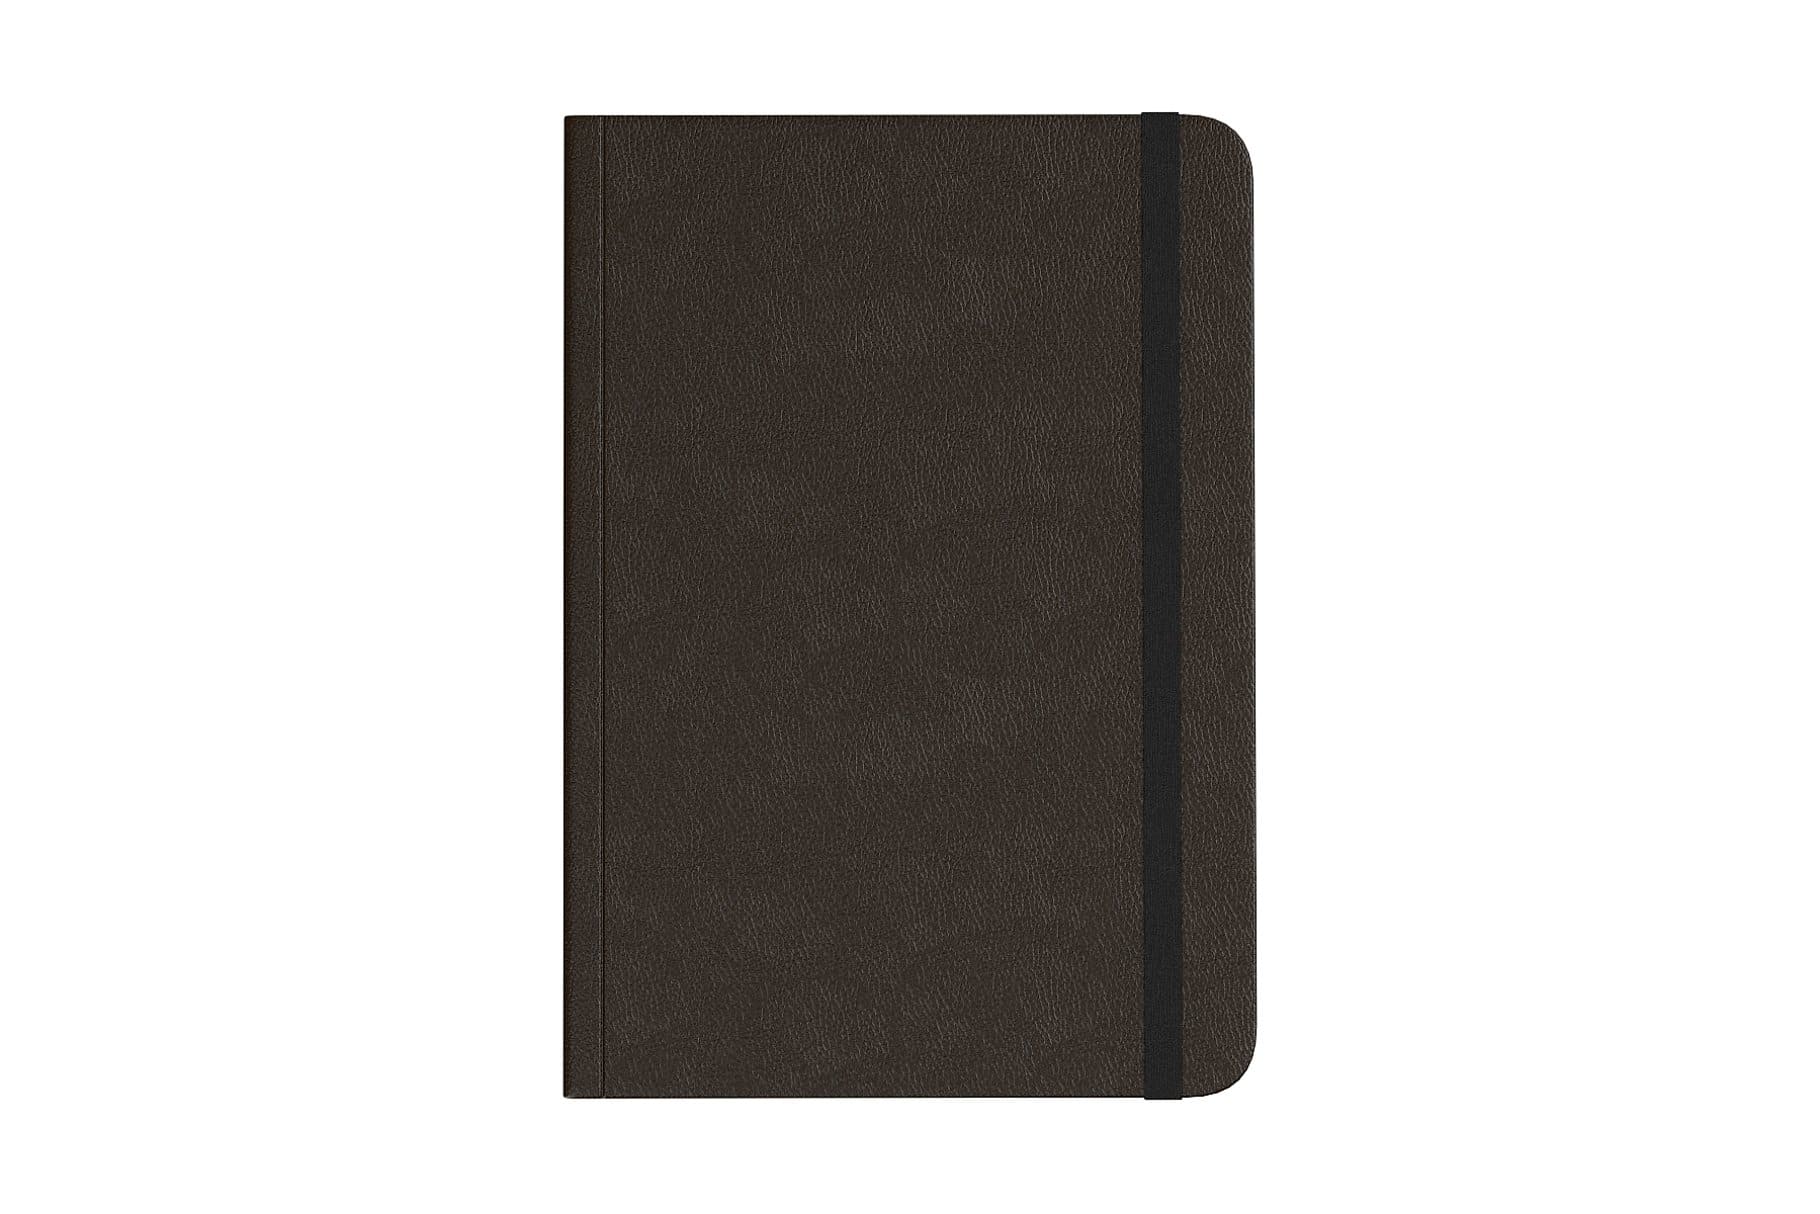 3D model of a notebook with semicircular edges.